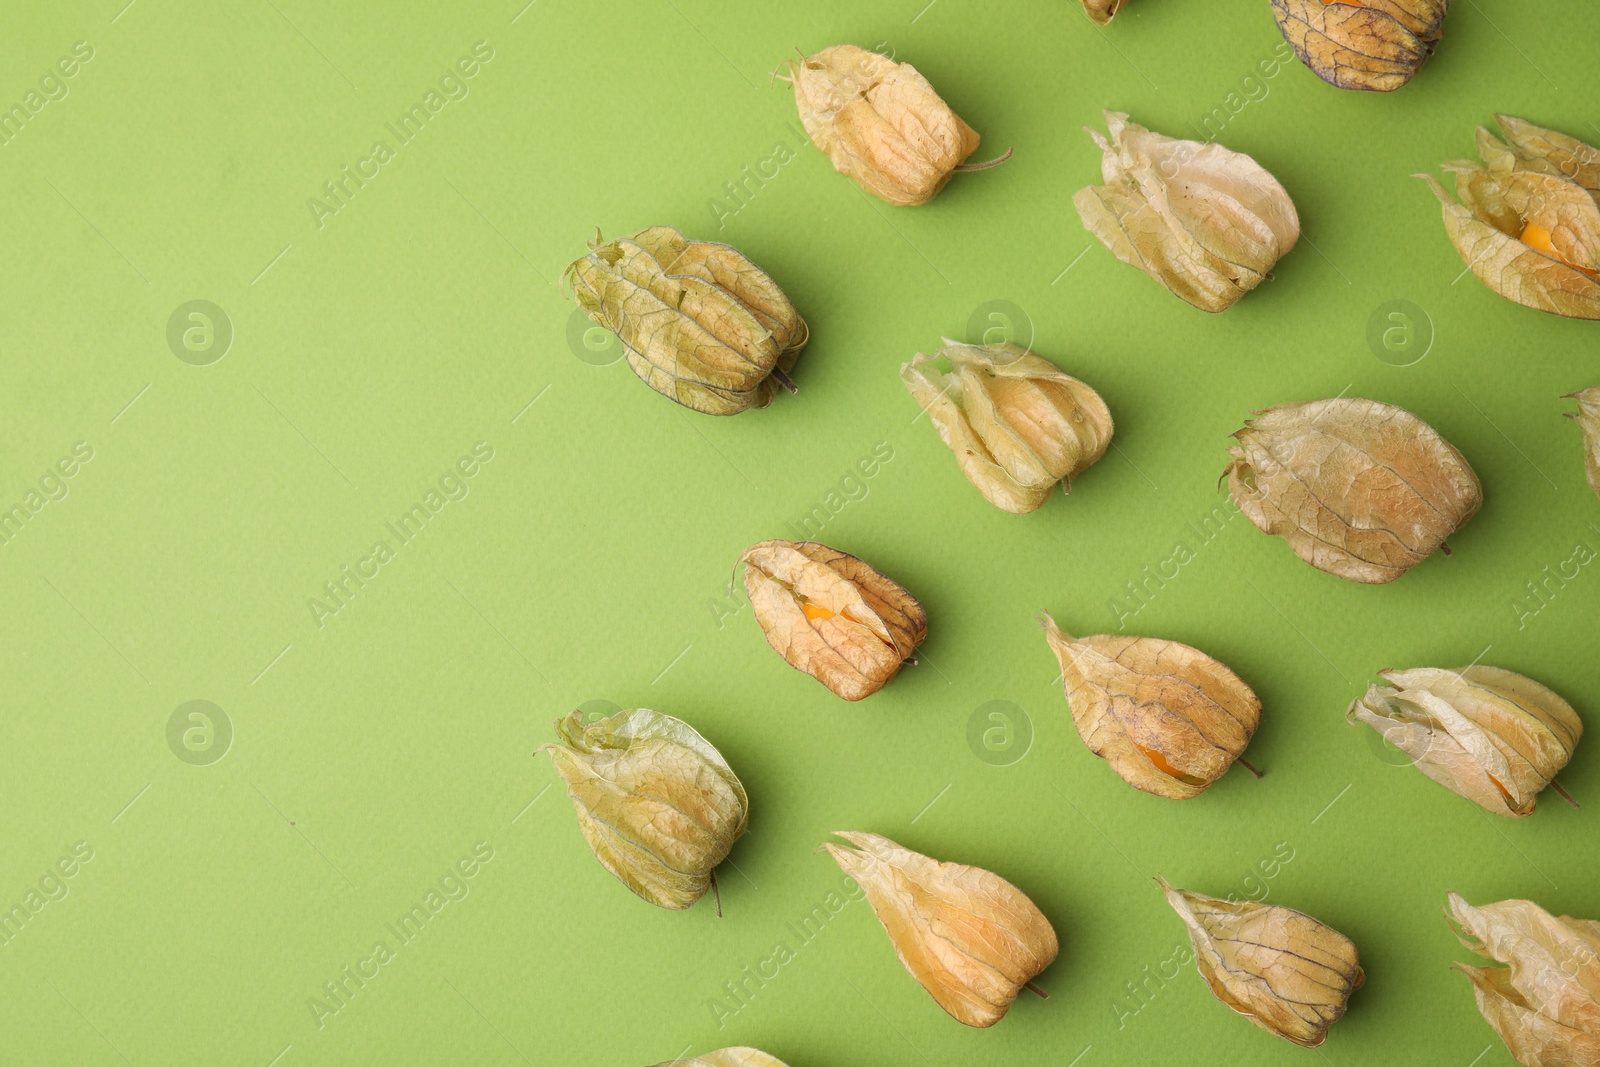 Photo of Ripe physalis fruits with calyxes on light green table, flat lay. Space for text